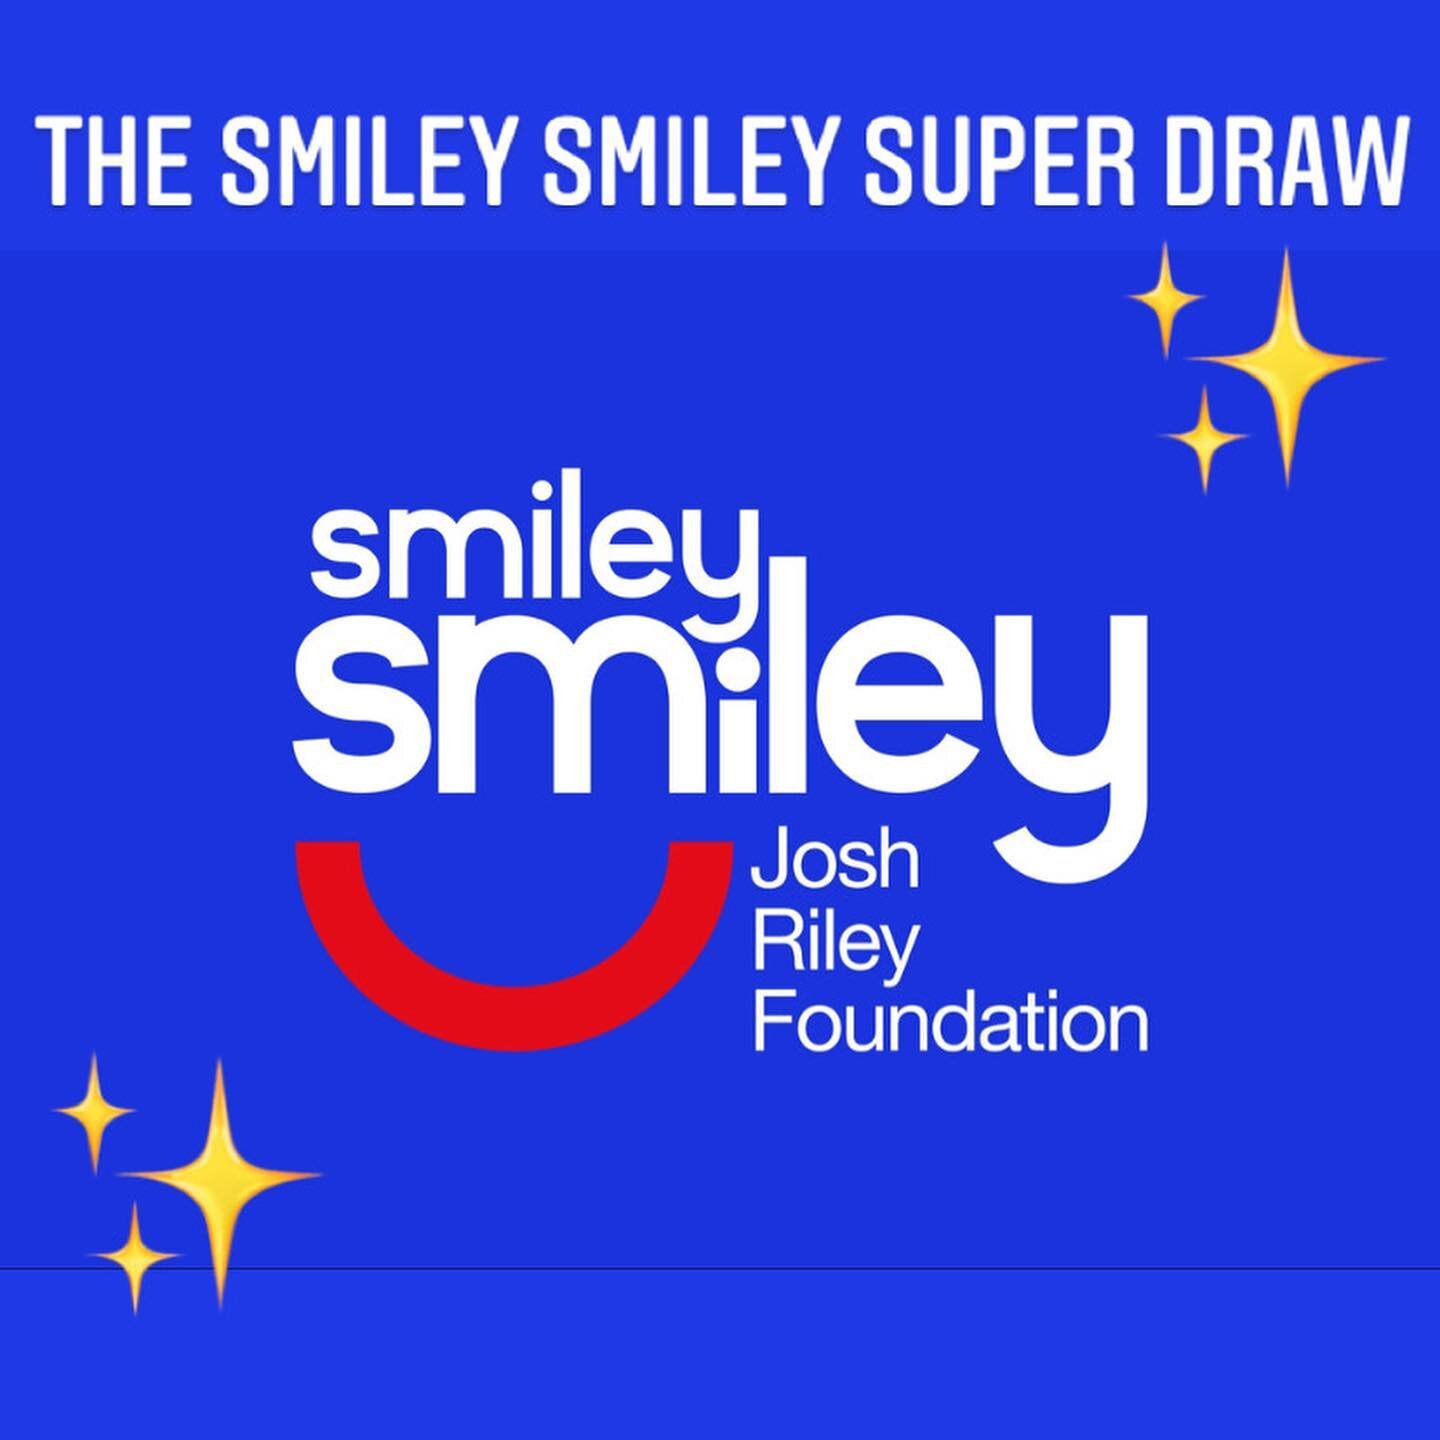 🚨ATTENTION 🚨

Have you heard about our brand new Smiley Smiley Super Draw?

We have been generously donated some fantastic prizes which are ALL up for grabs! The question is... will YOU be the winner?

Here&rsquo;s what you could win...

⭐️ A 65&rd